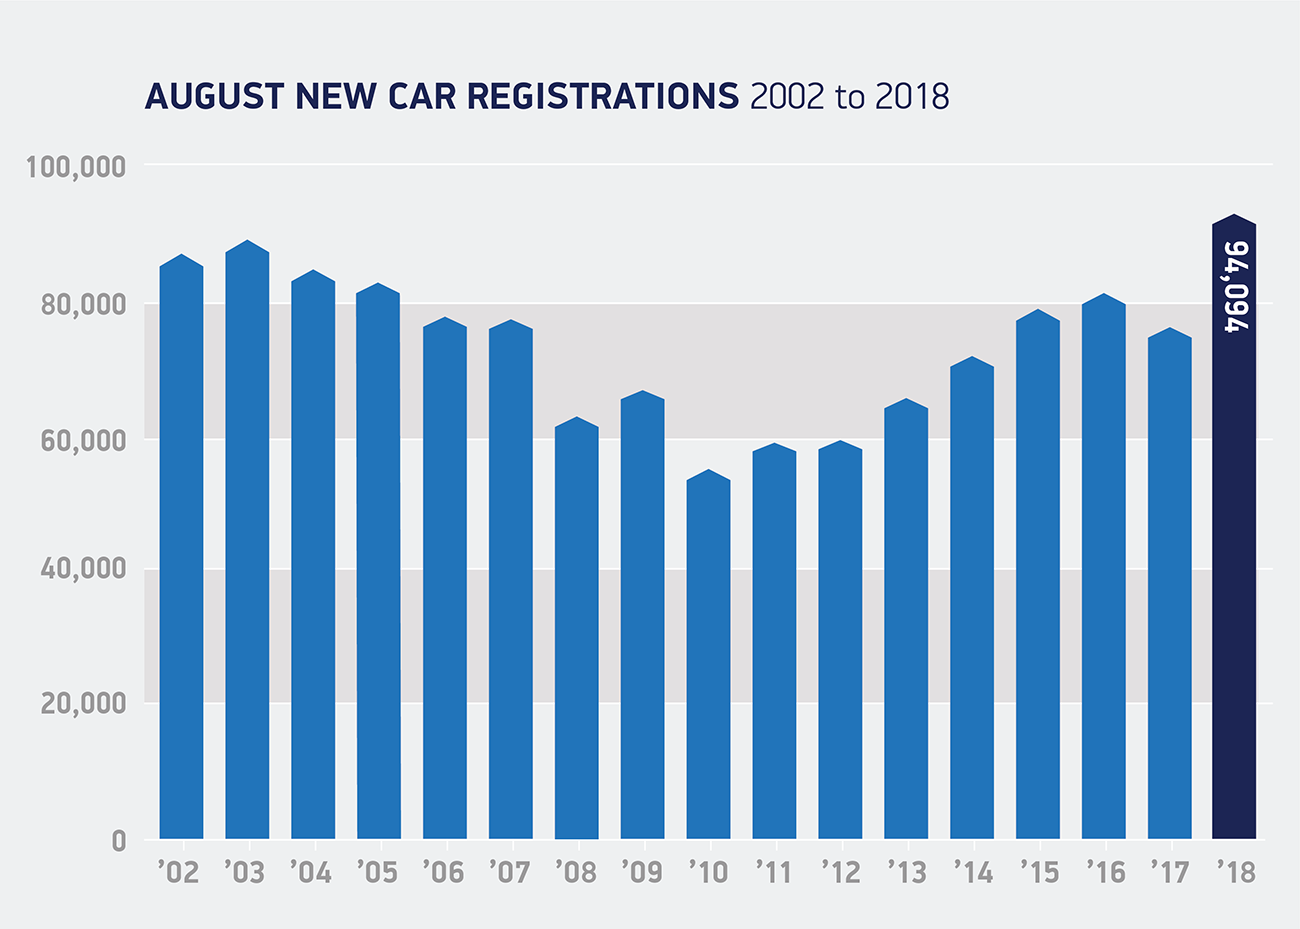 UK new car market rises in August as one in 12 buyers goes electric